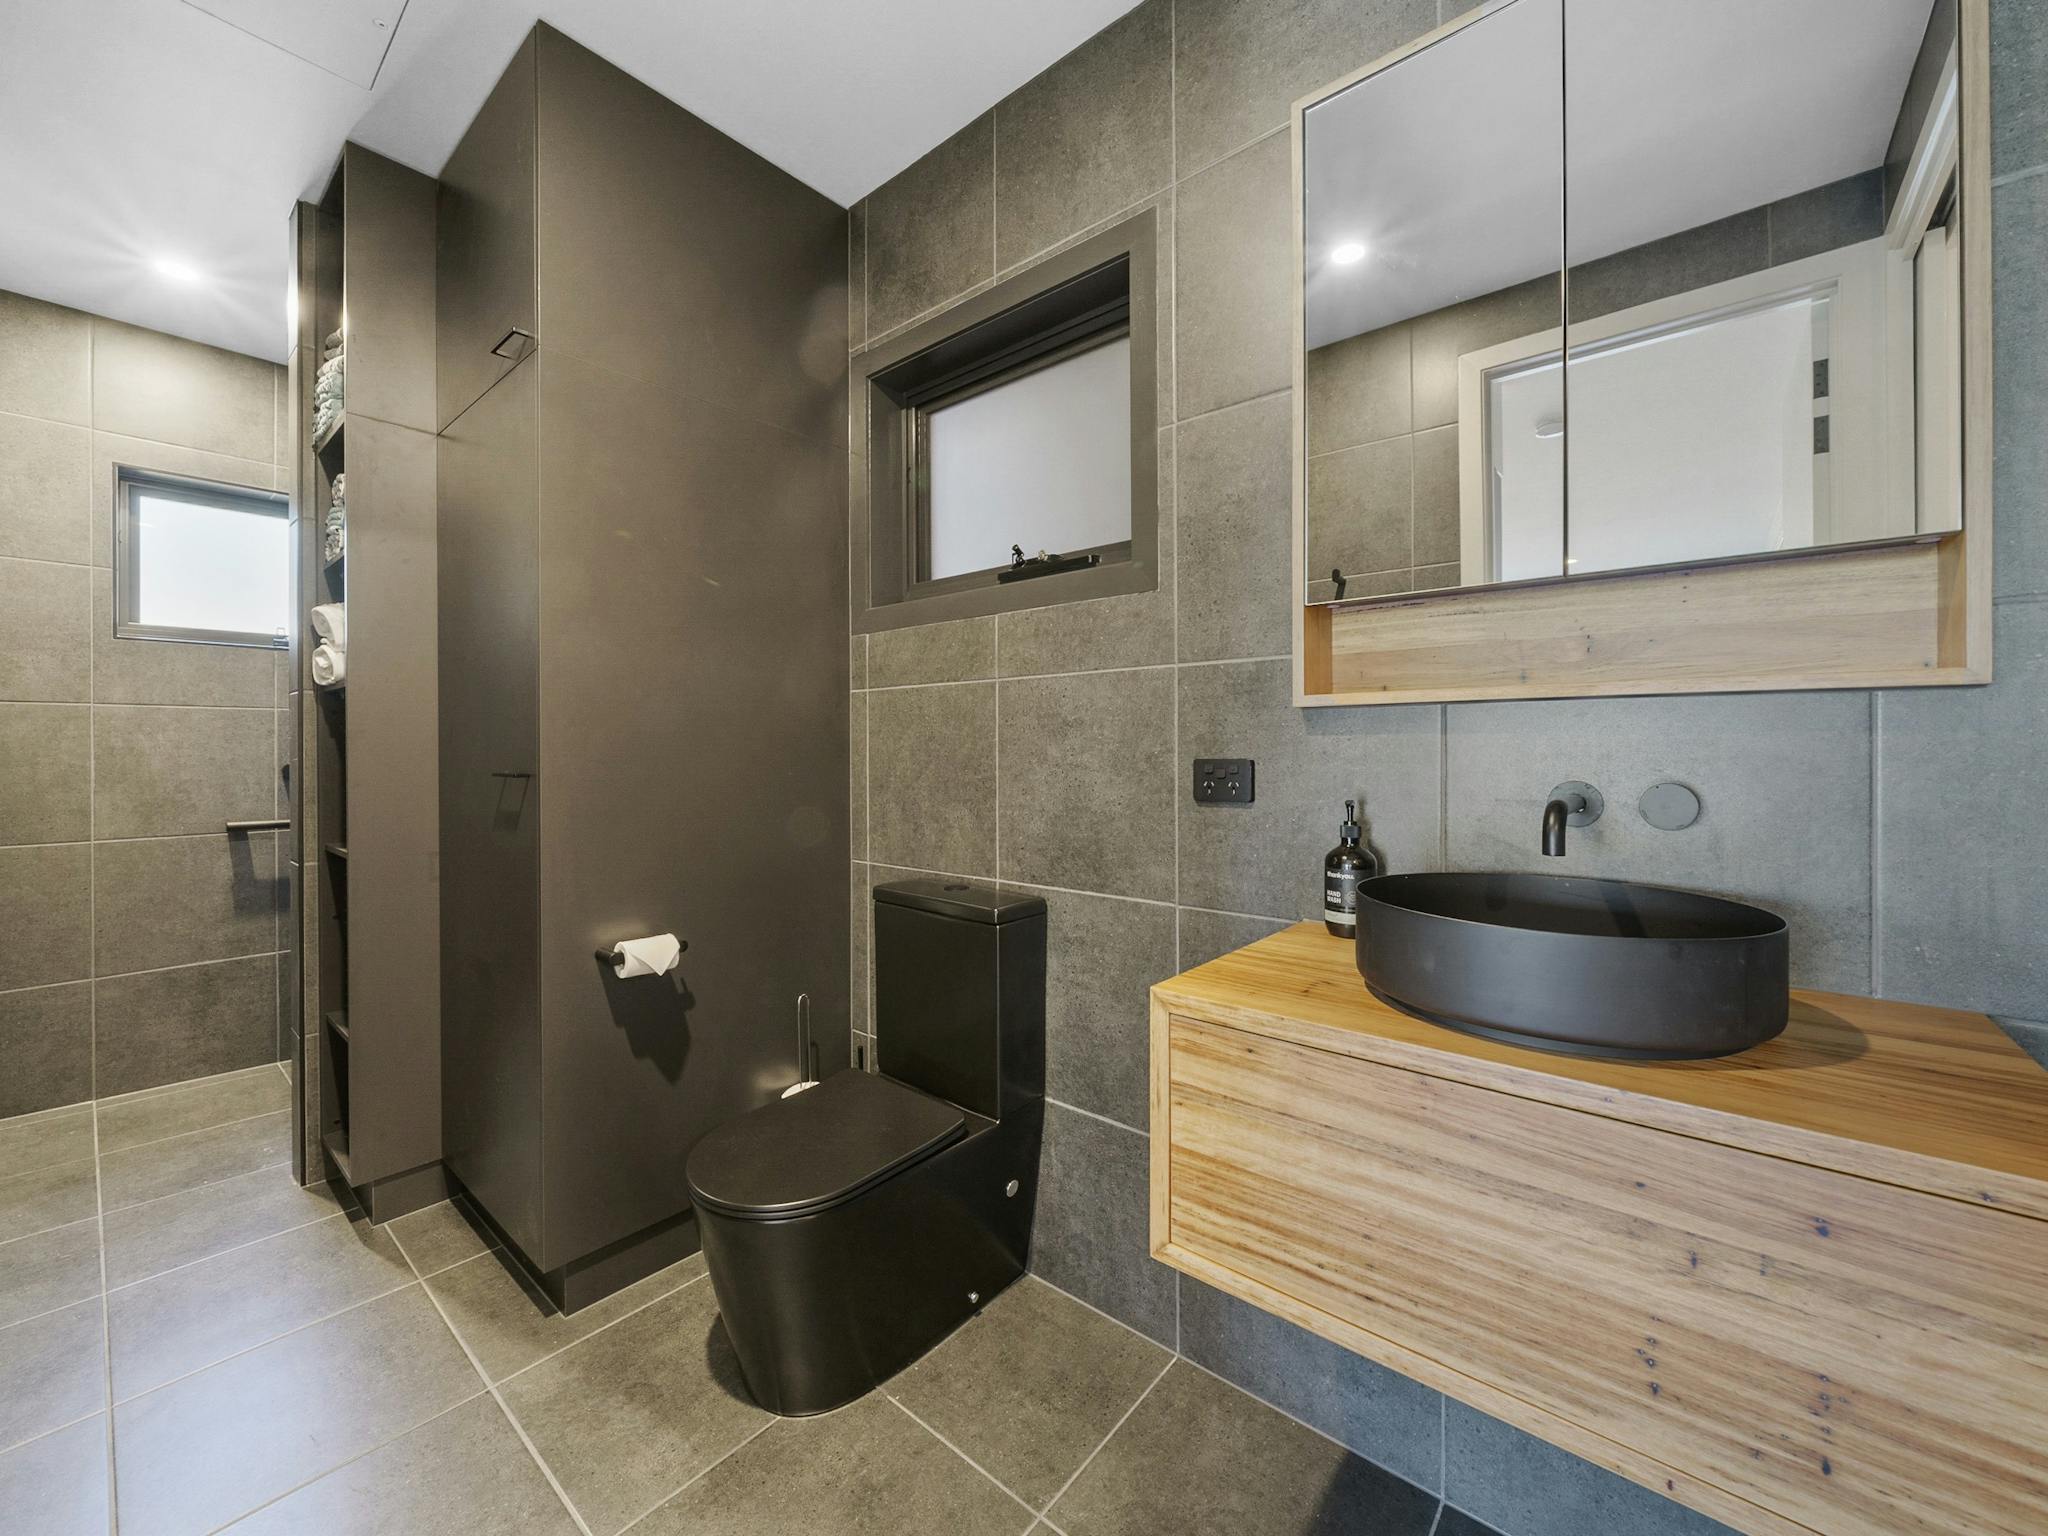 Bathroom with walk in and out shower, total luxury. European Laundry, washing machine and dryer.